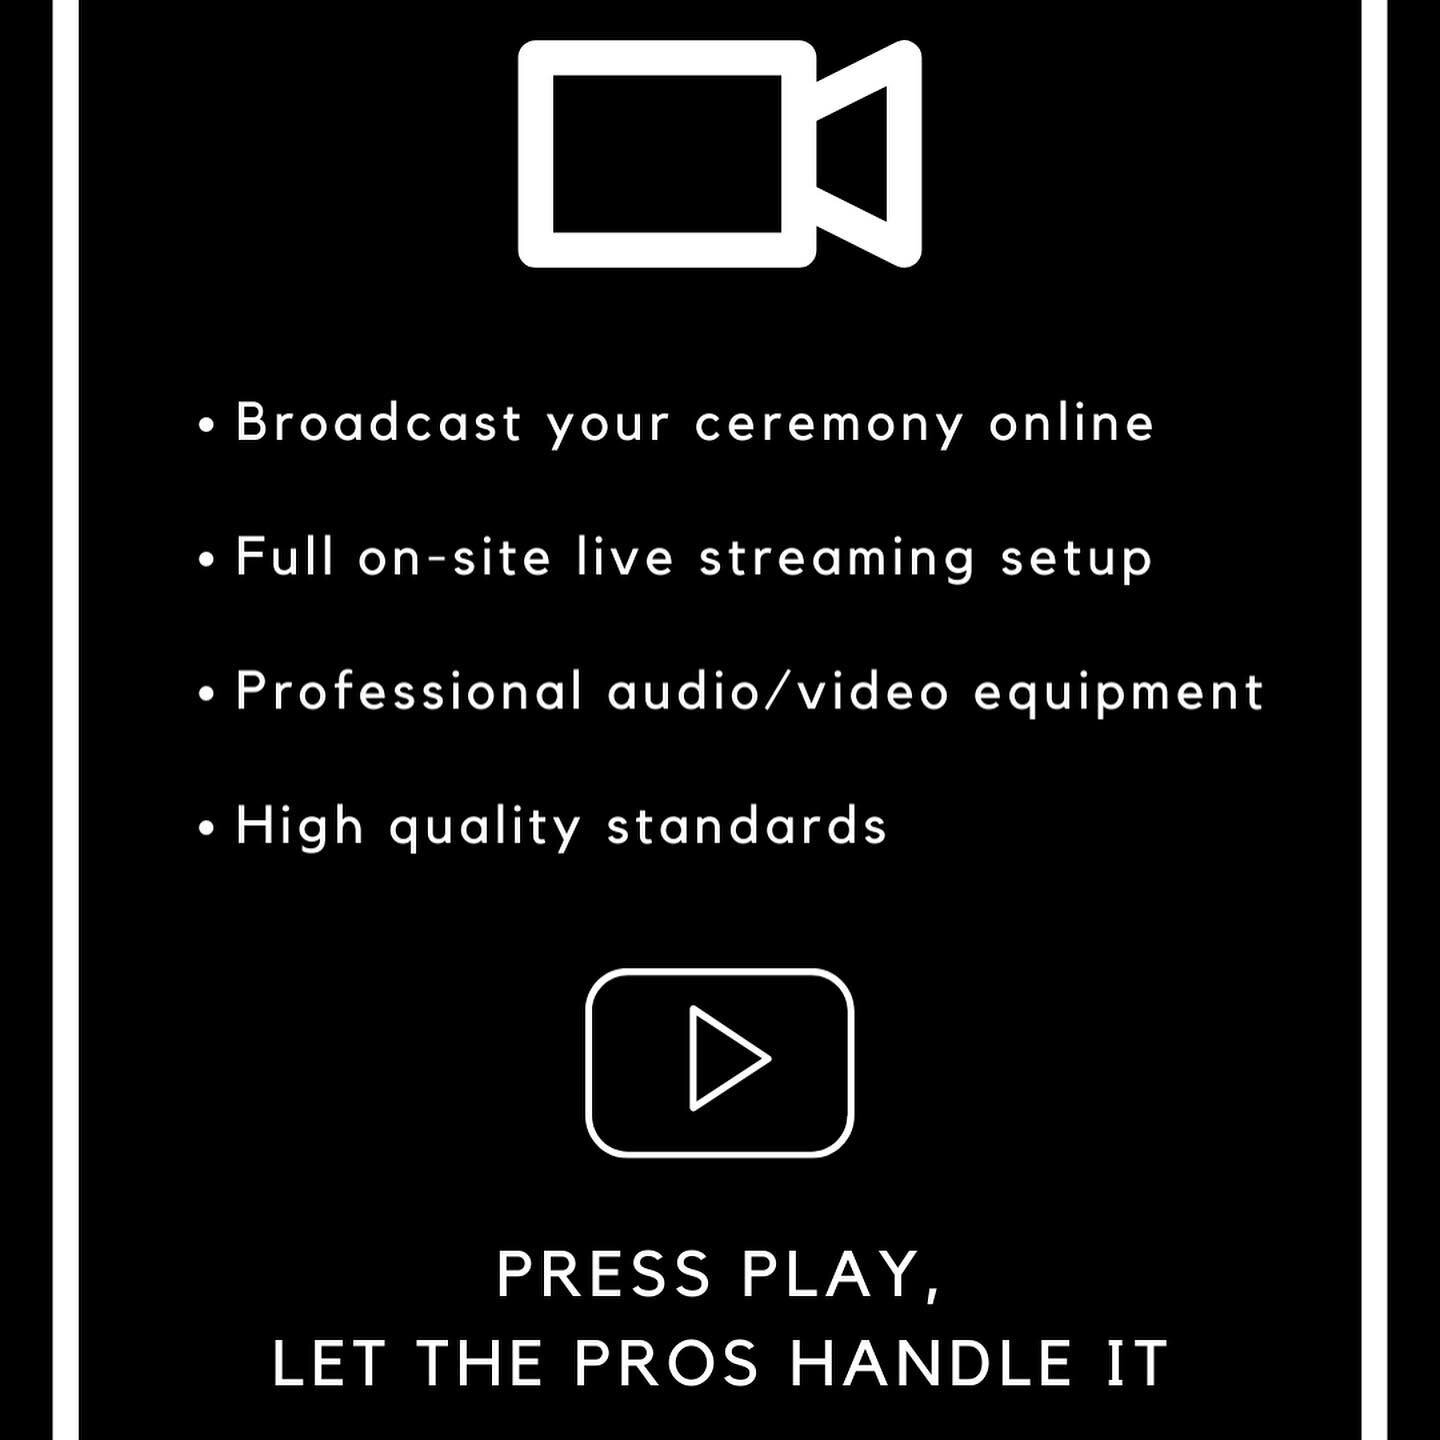 Learn more about our new Live Streaming service and connect with us! 

#dj #entertainment #wedding #mtlwedding #mtlweddings #livestream #livestreaming #weddings #marriage #ceremony #music #audio #video